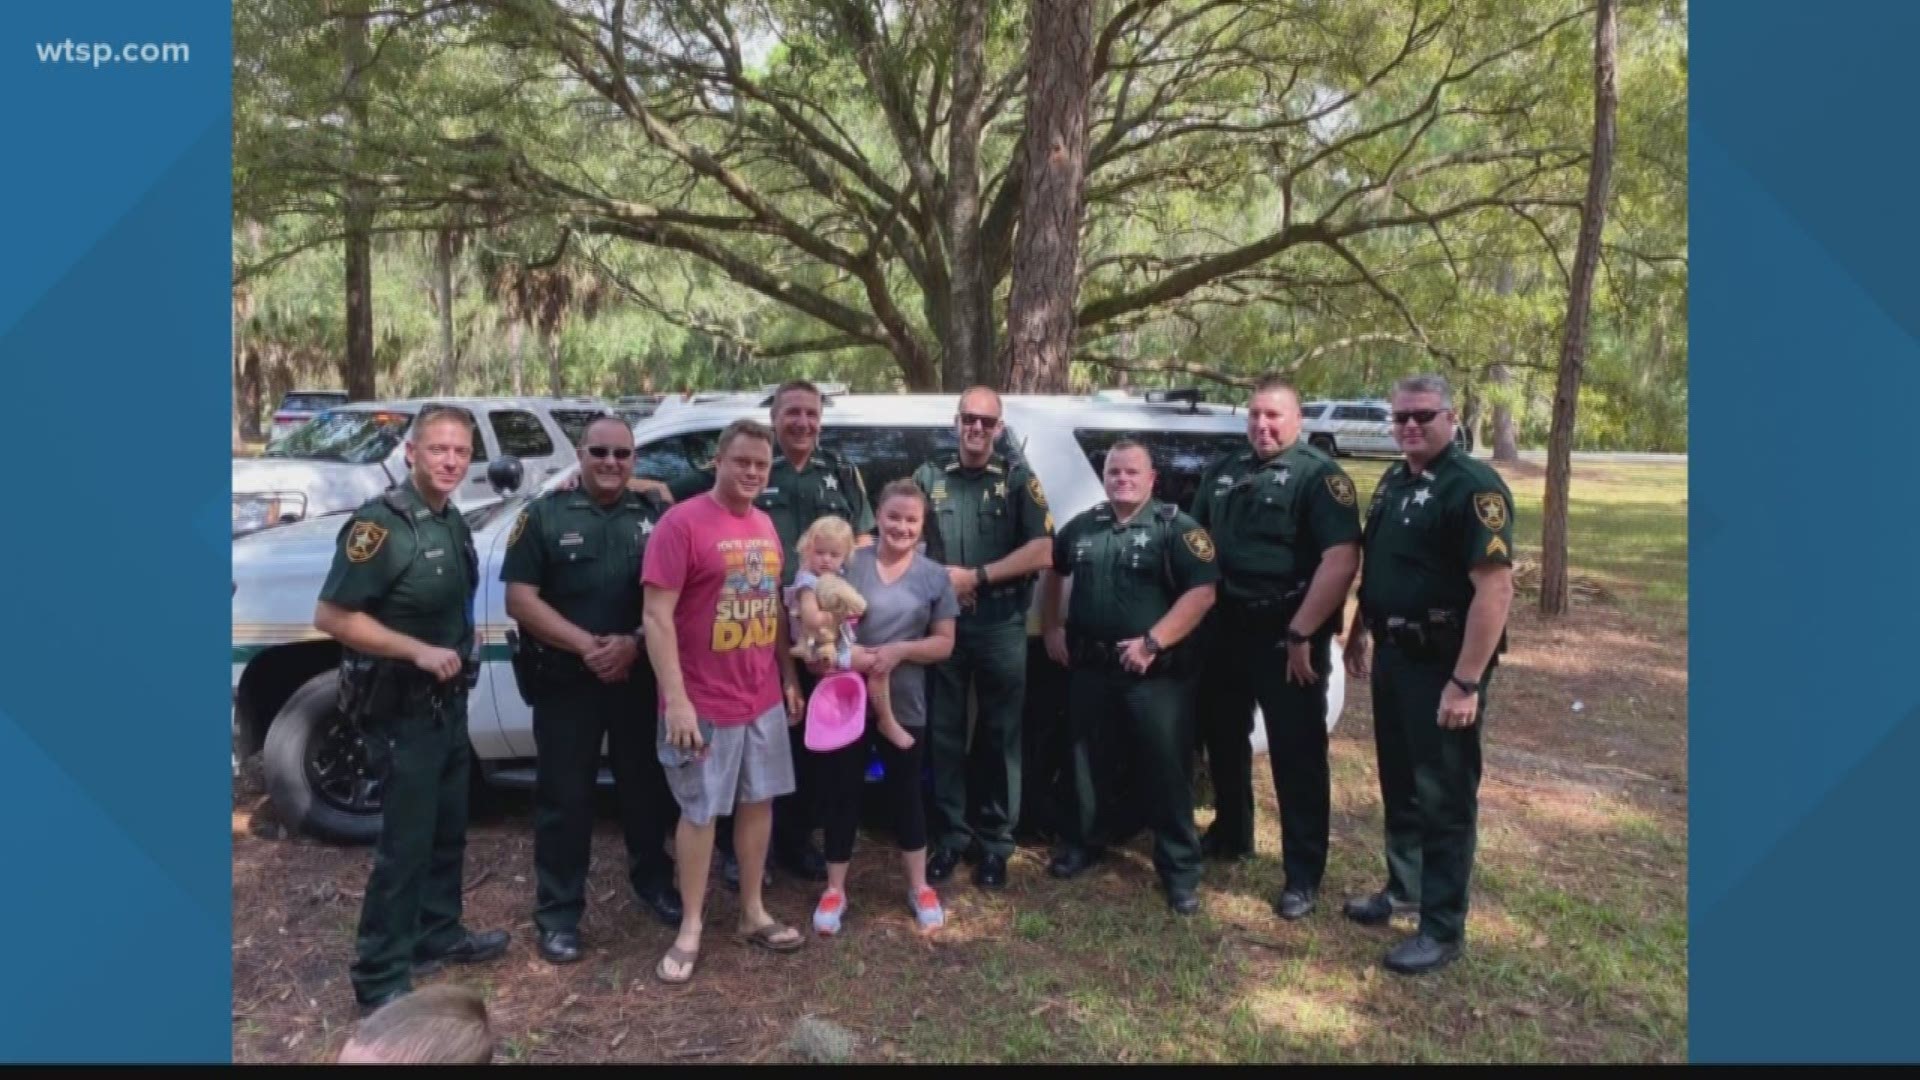 When no one showed up to a little girl's birthday party on Sunday, Pinellas County sheriff's deputies arrived to make sure she knew she wasn't alone.